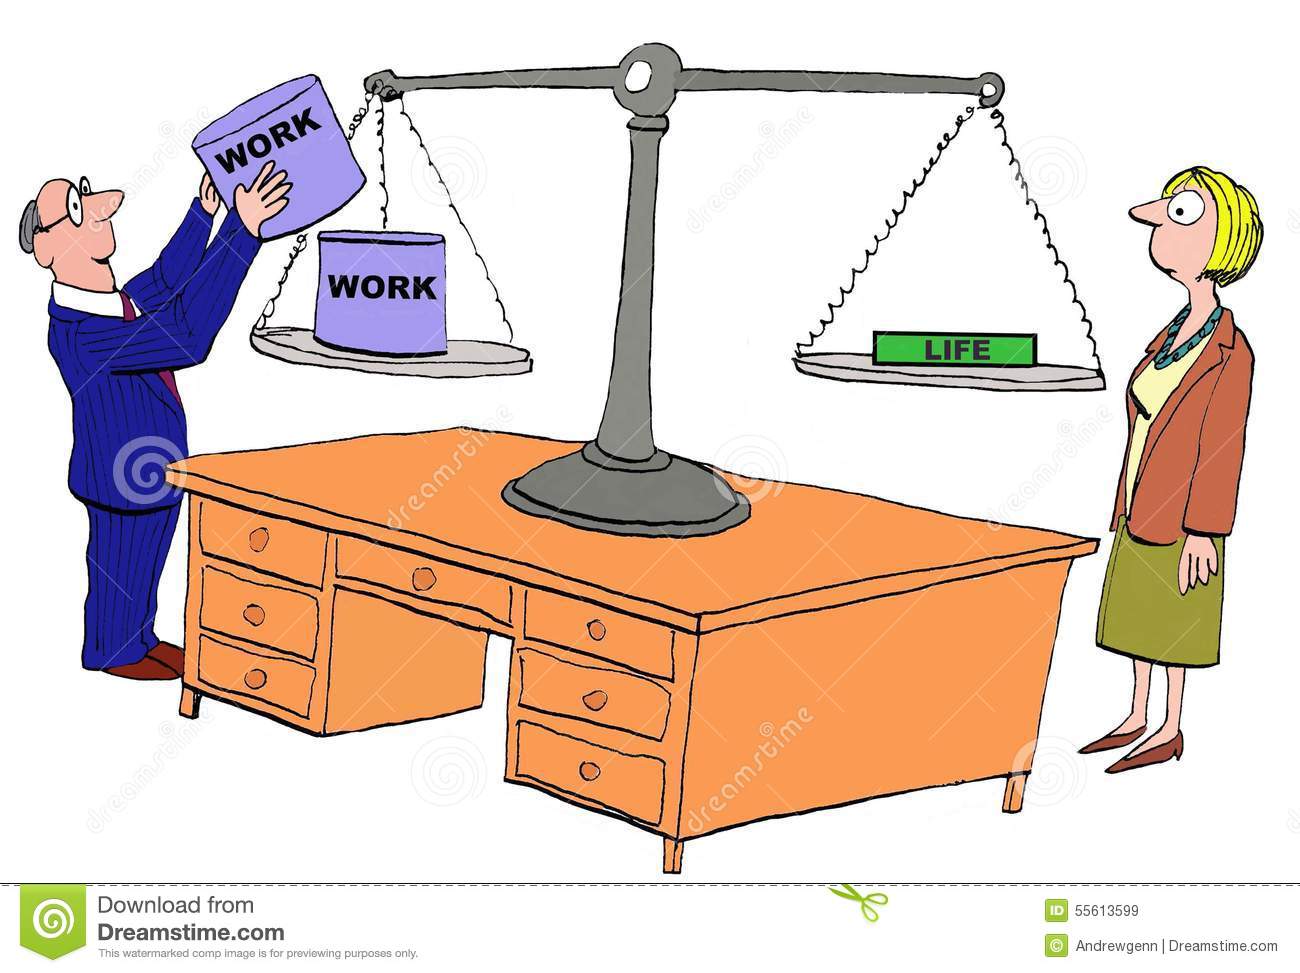 lack-work-life-balance-business-cartoon-business-boss-adding-more-businesswoman-to-scale-55613599